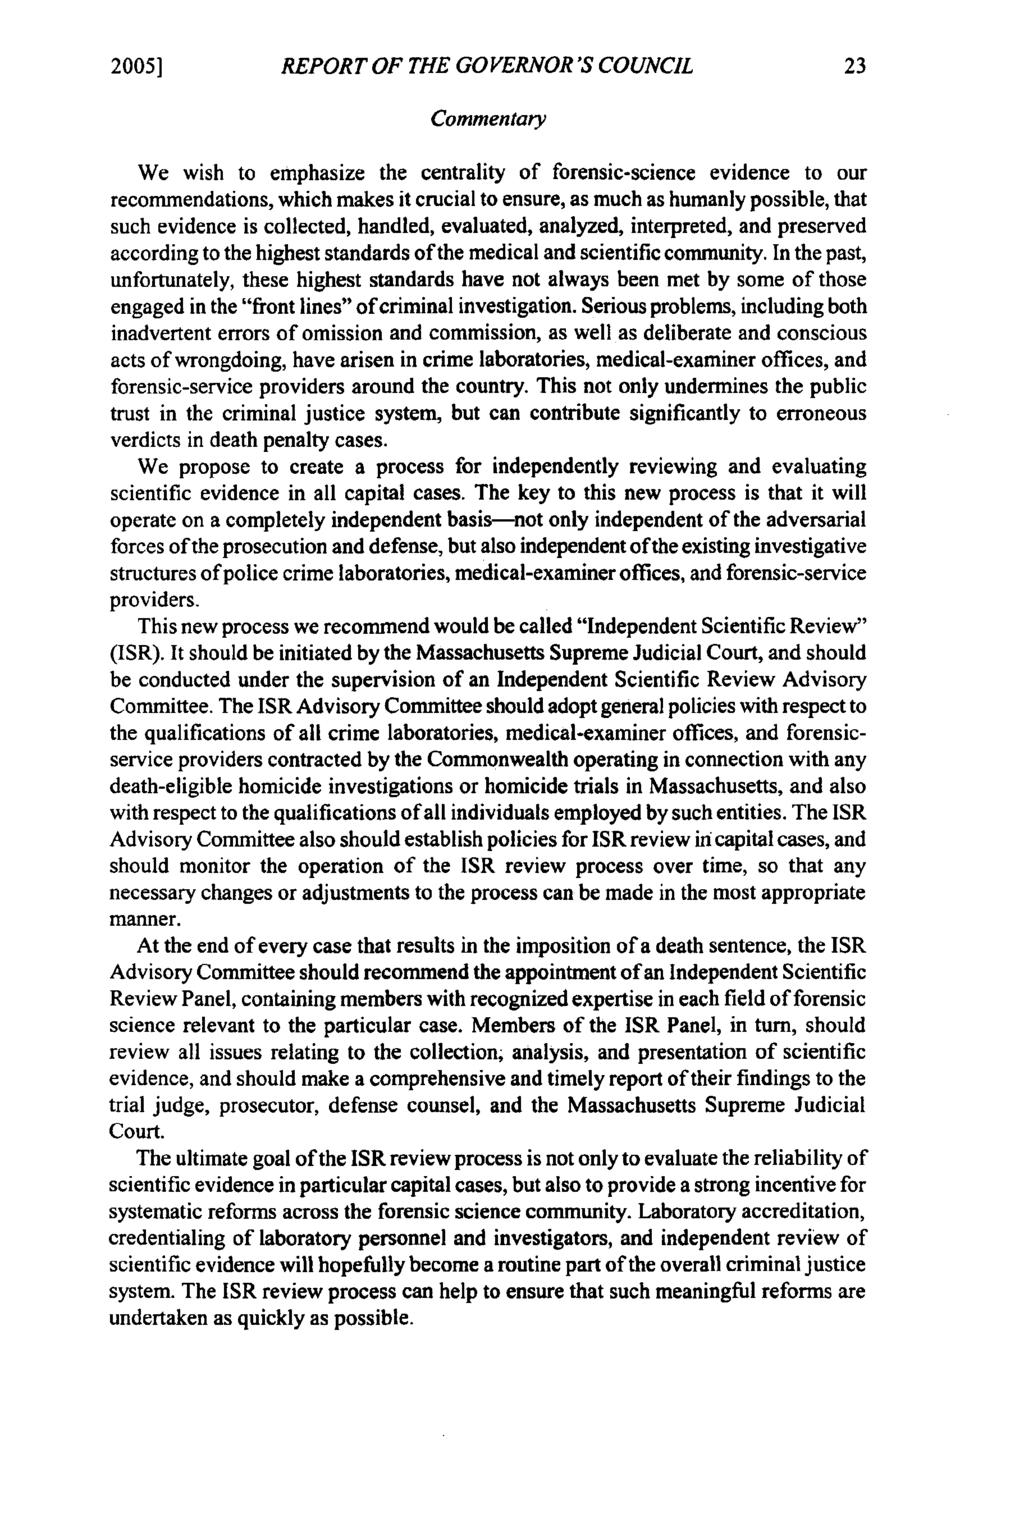 2005] REPORT OF THE GOVERNOR'S COUNCIL Commentary We wish to emphasize the centrality of forensic-science evidence to our recommendations, which makes it crucial to ensure, as much as humanly